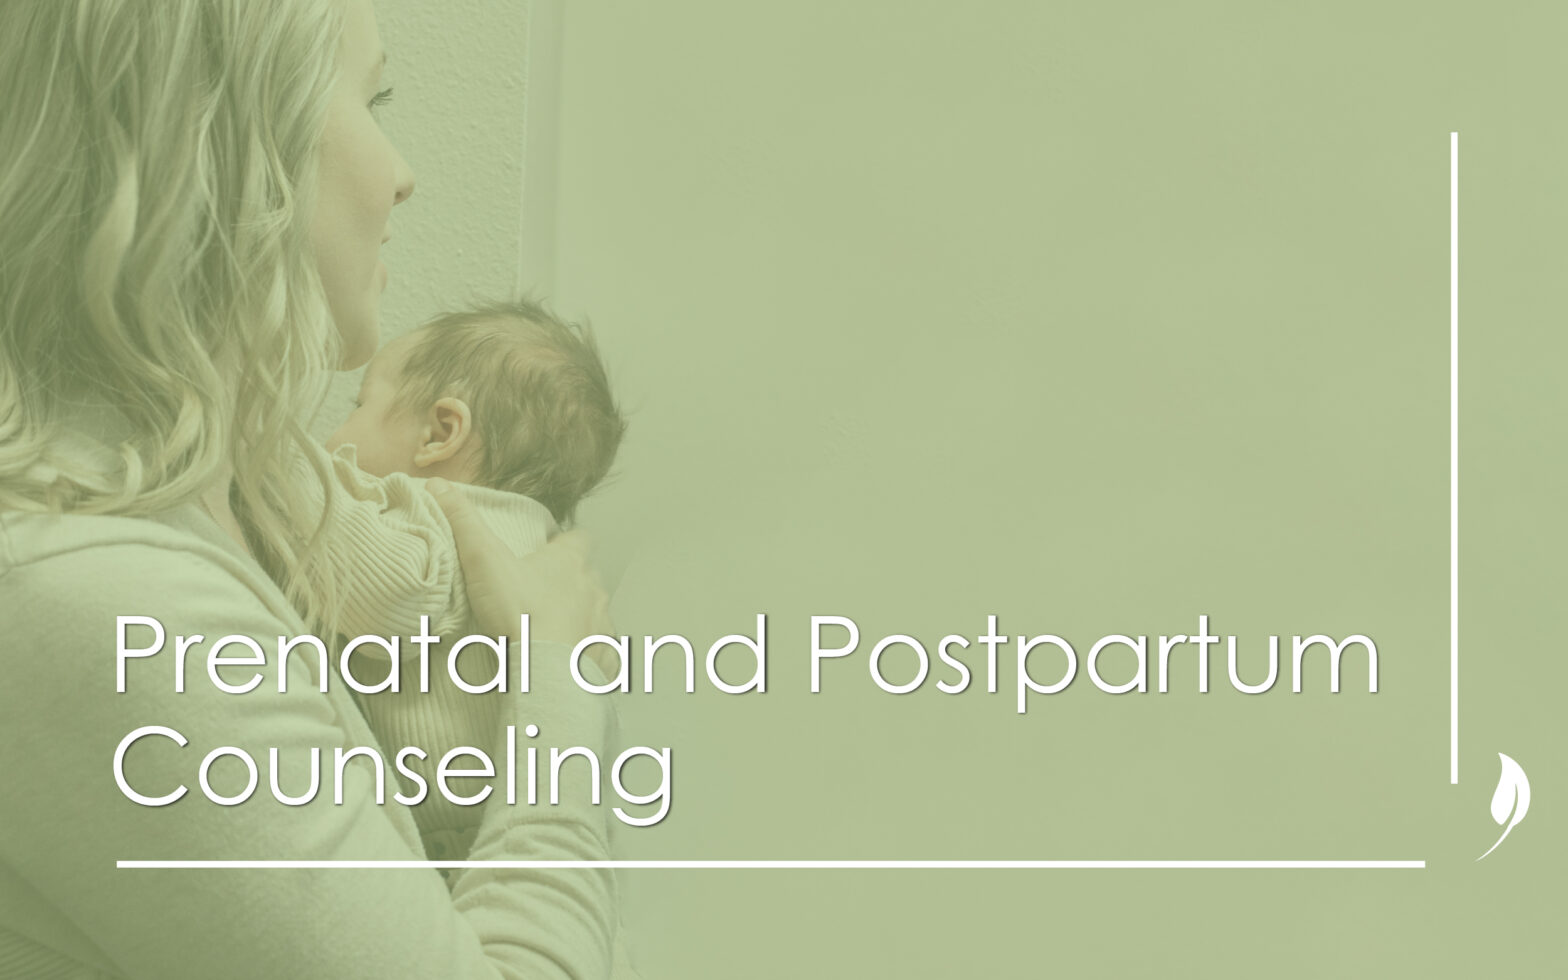 Prenatal and Postpartum Counseling